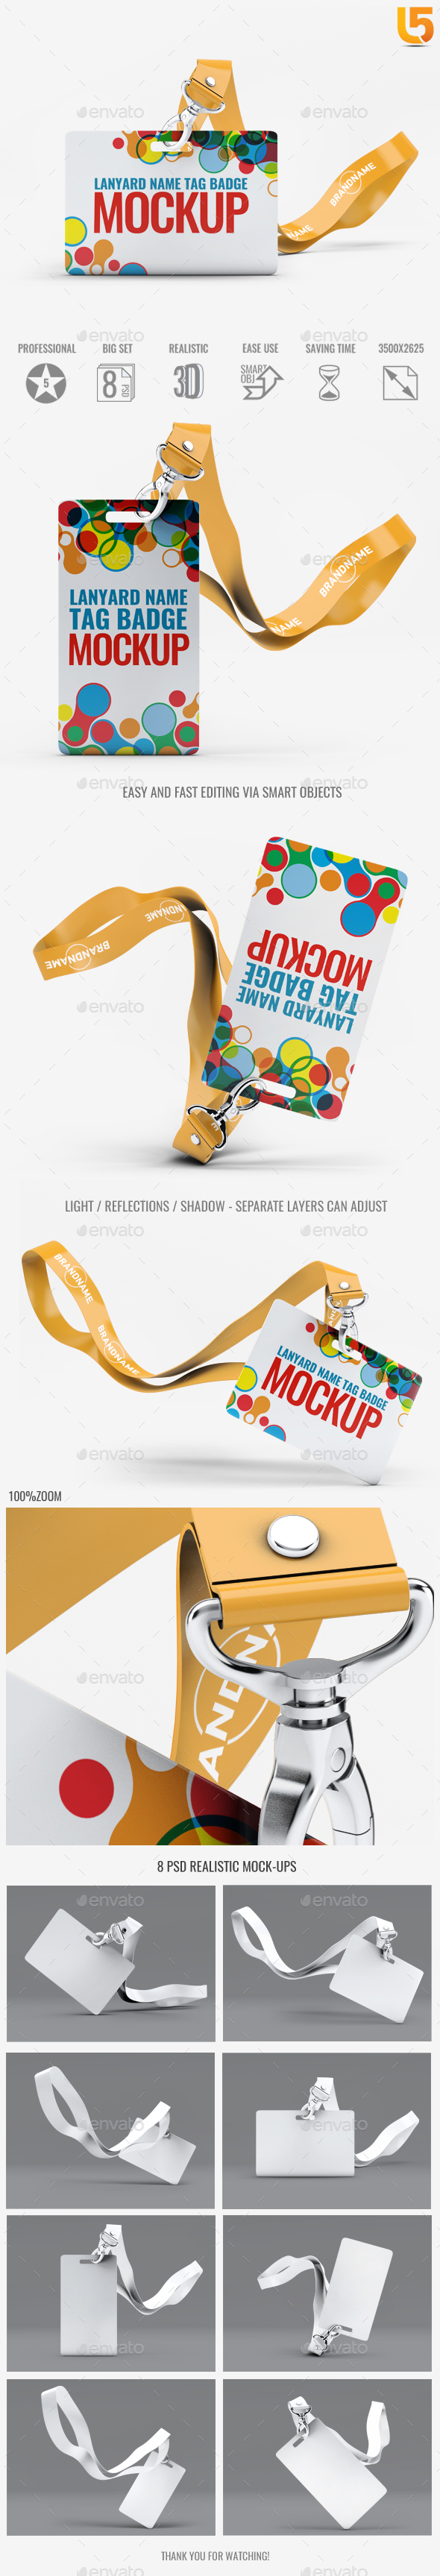 Badge Mockup Graphics Designs Templates From Graphicriver